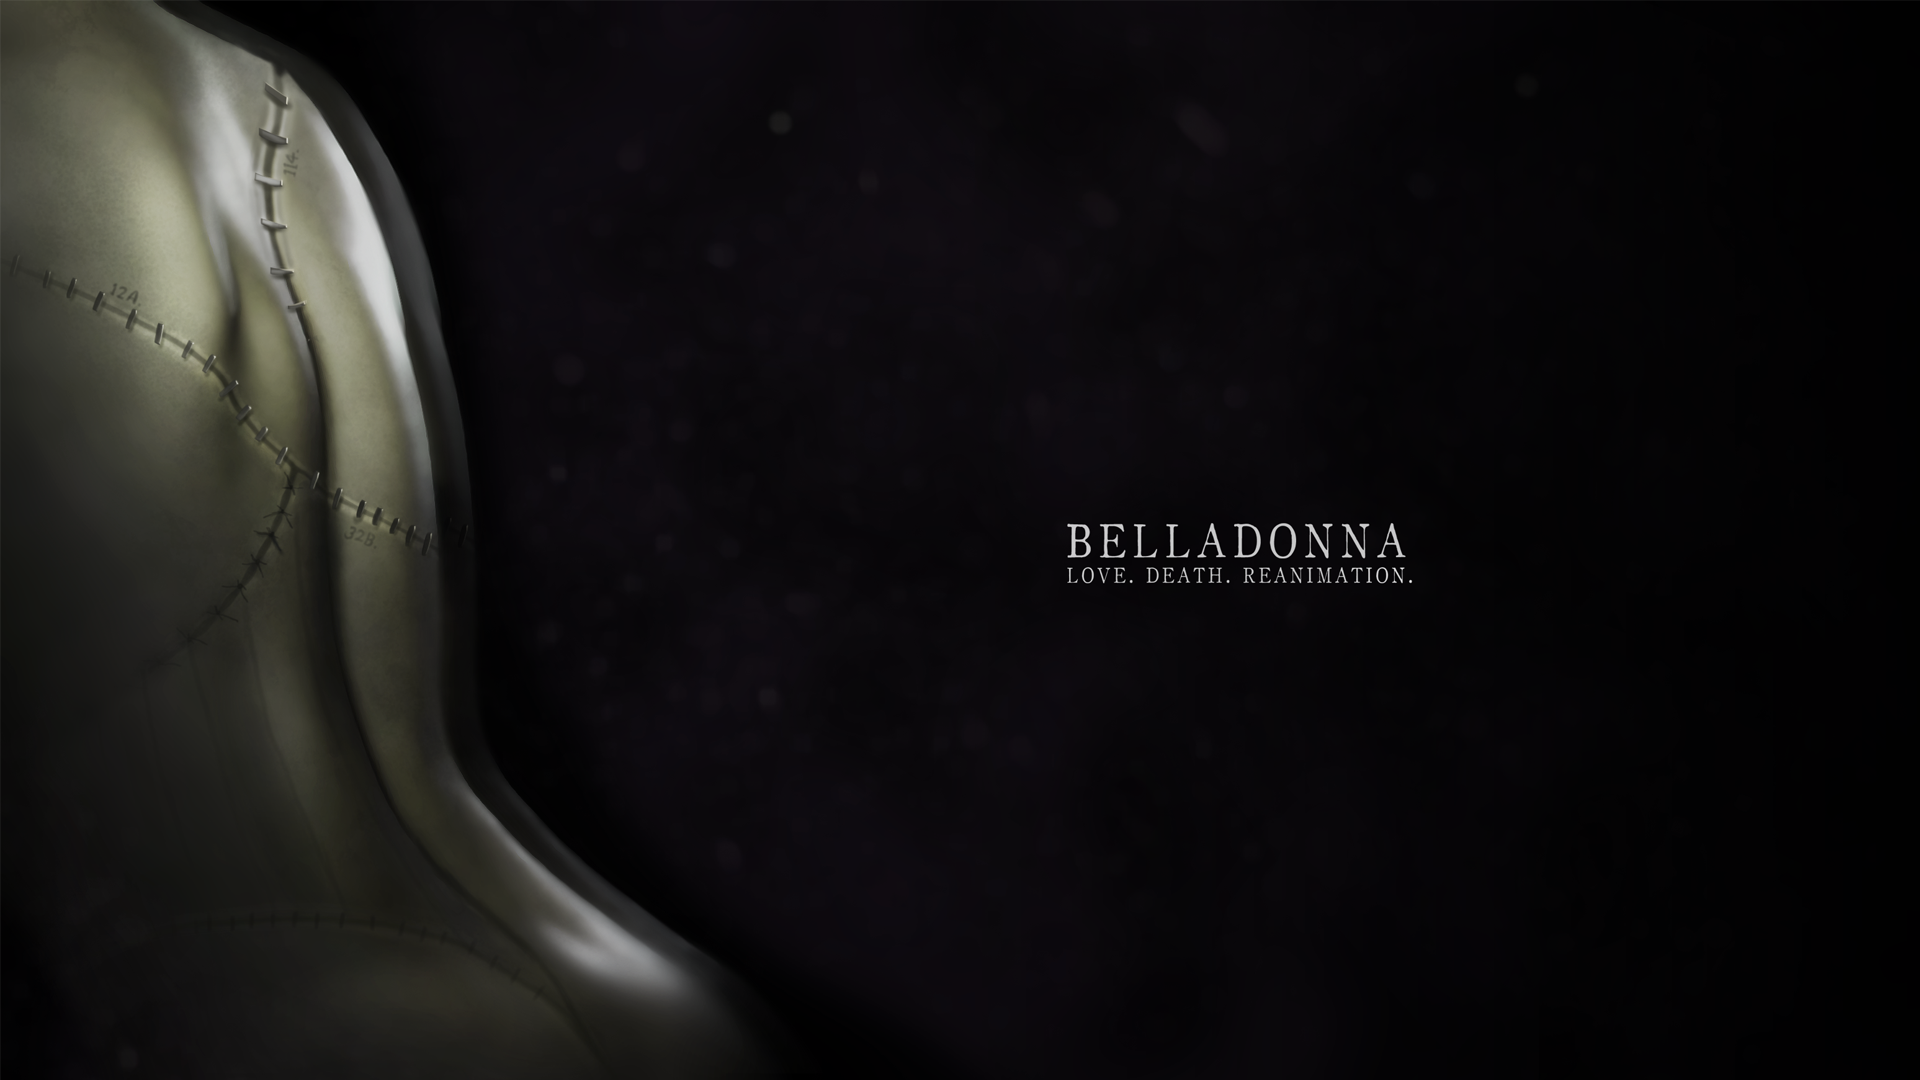 Belladonna A Mystery Adventure About The Reanimated Dead